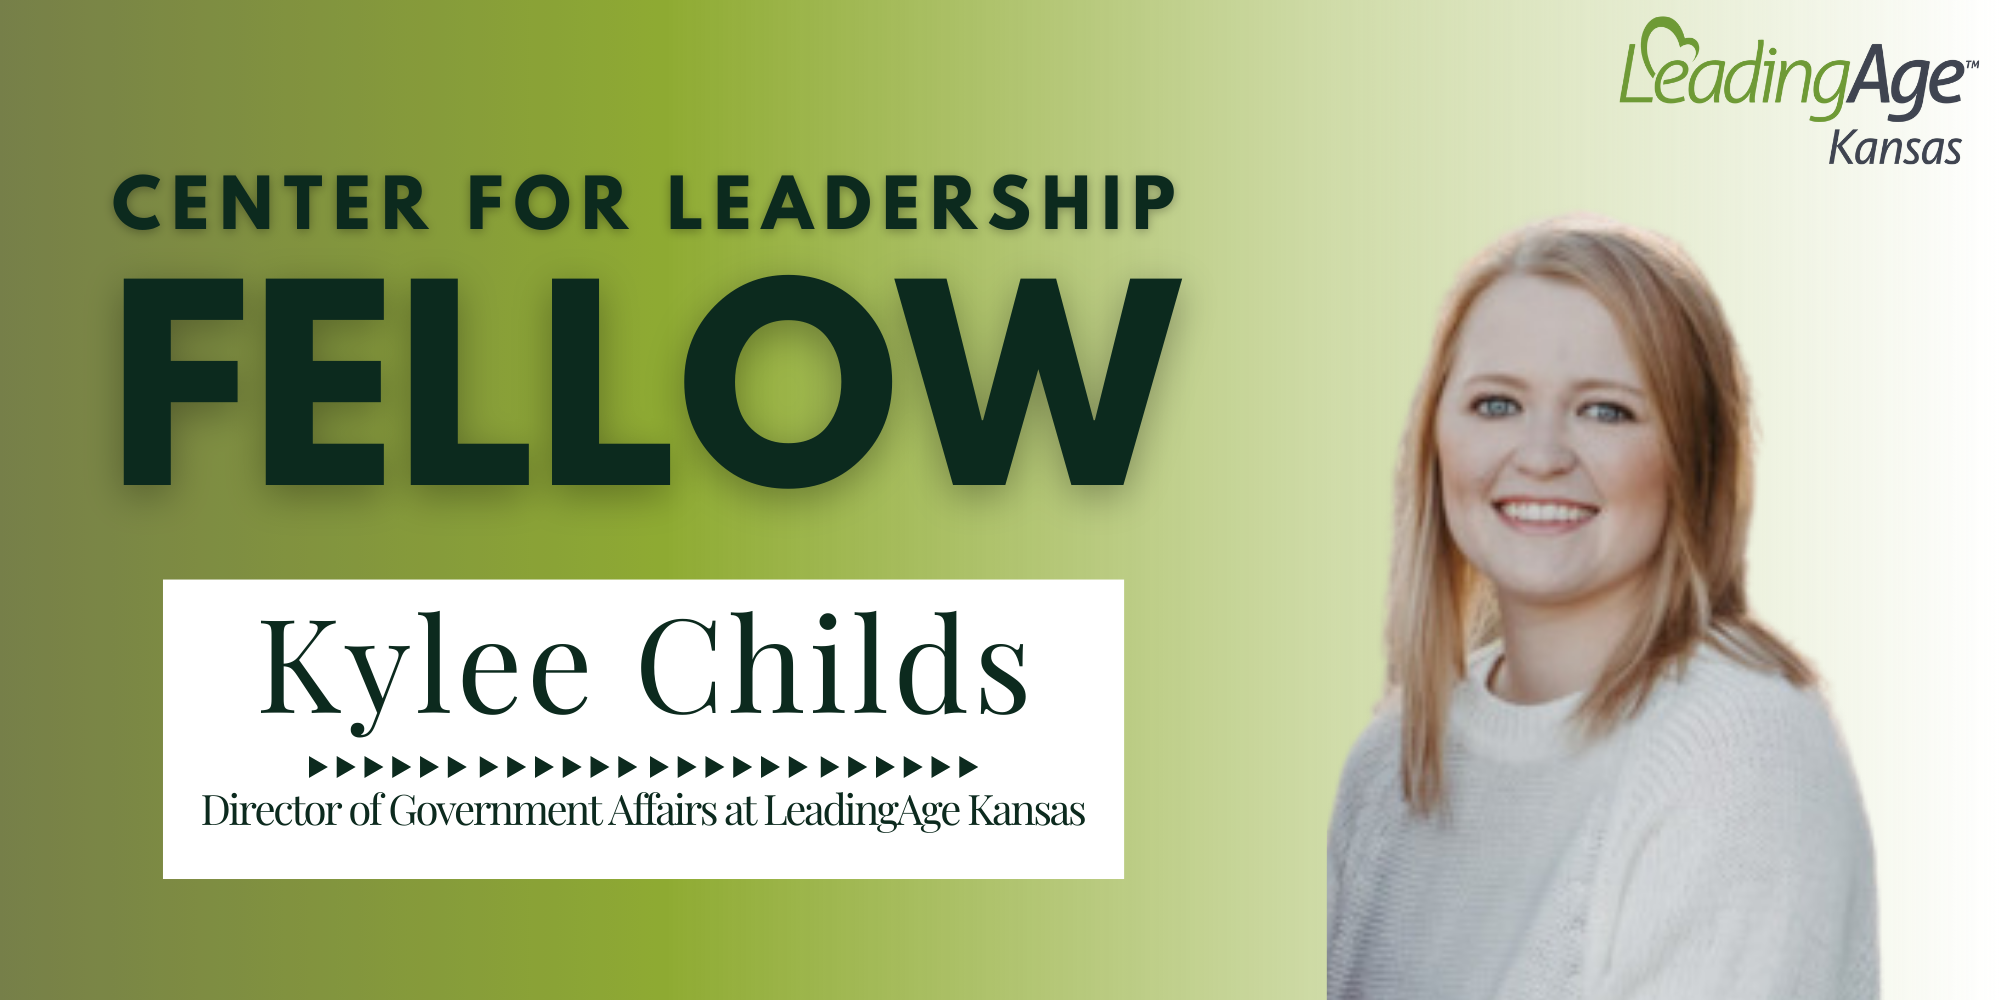 Kylee Childs, Director of Government Affairs at LeadingAge Kansas